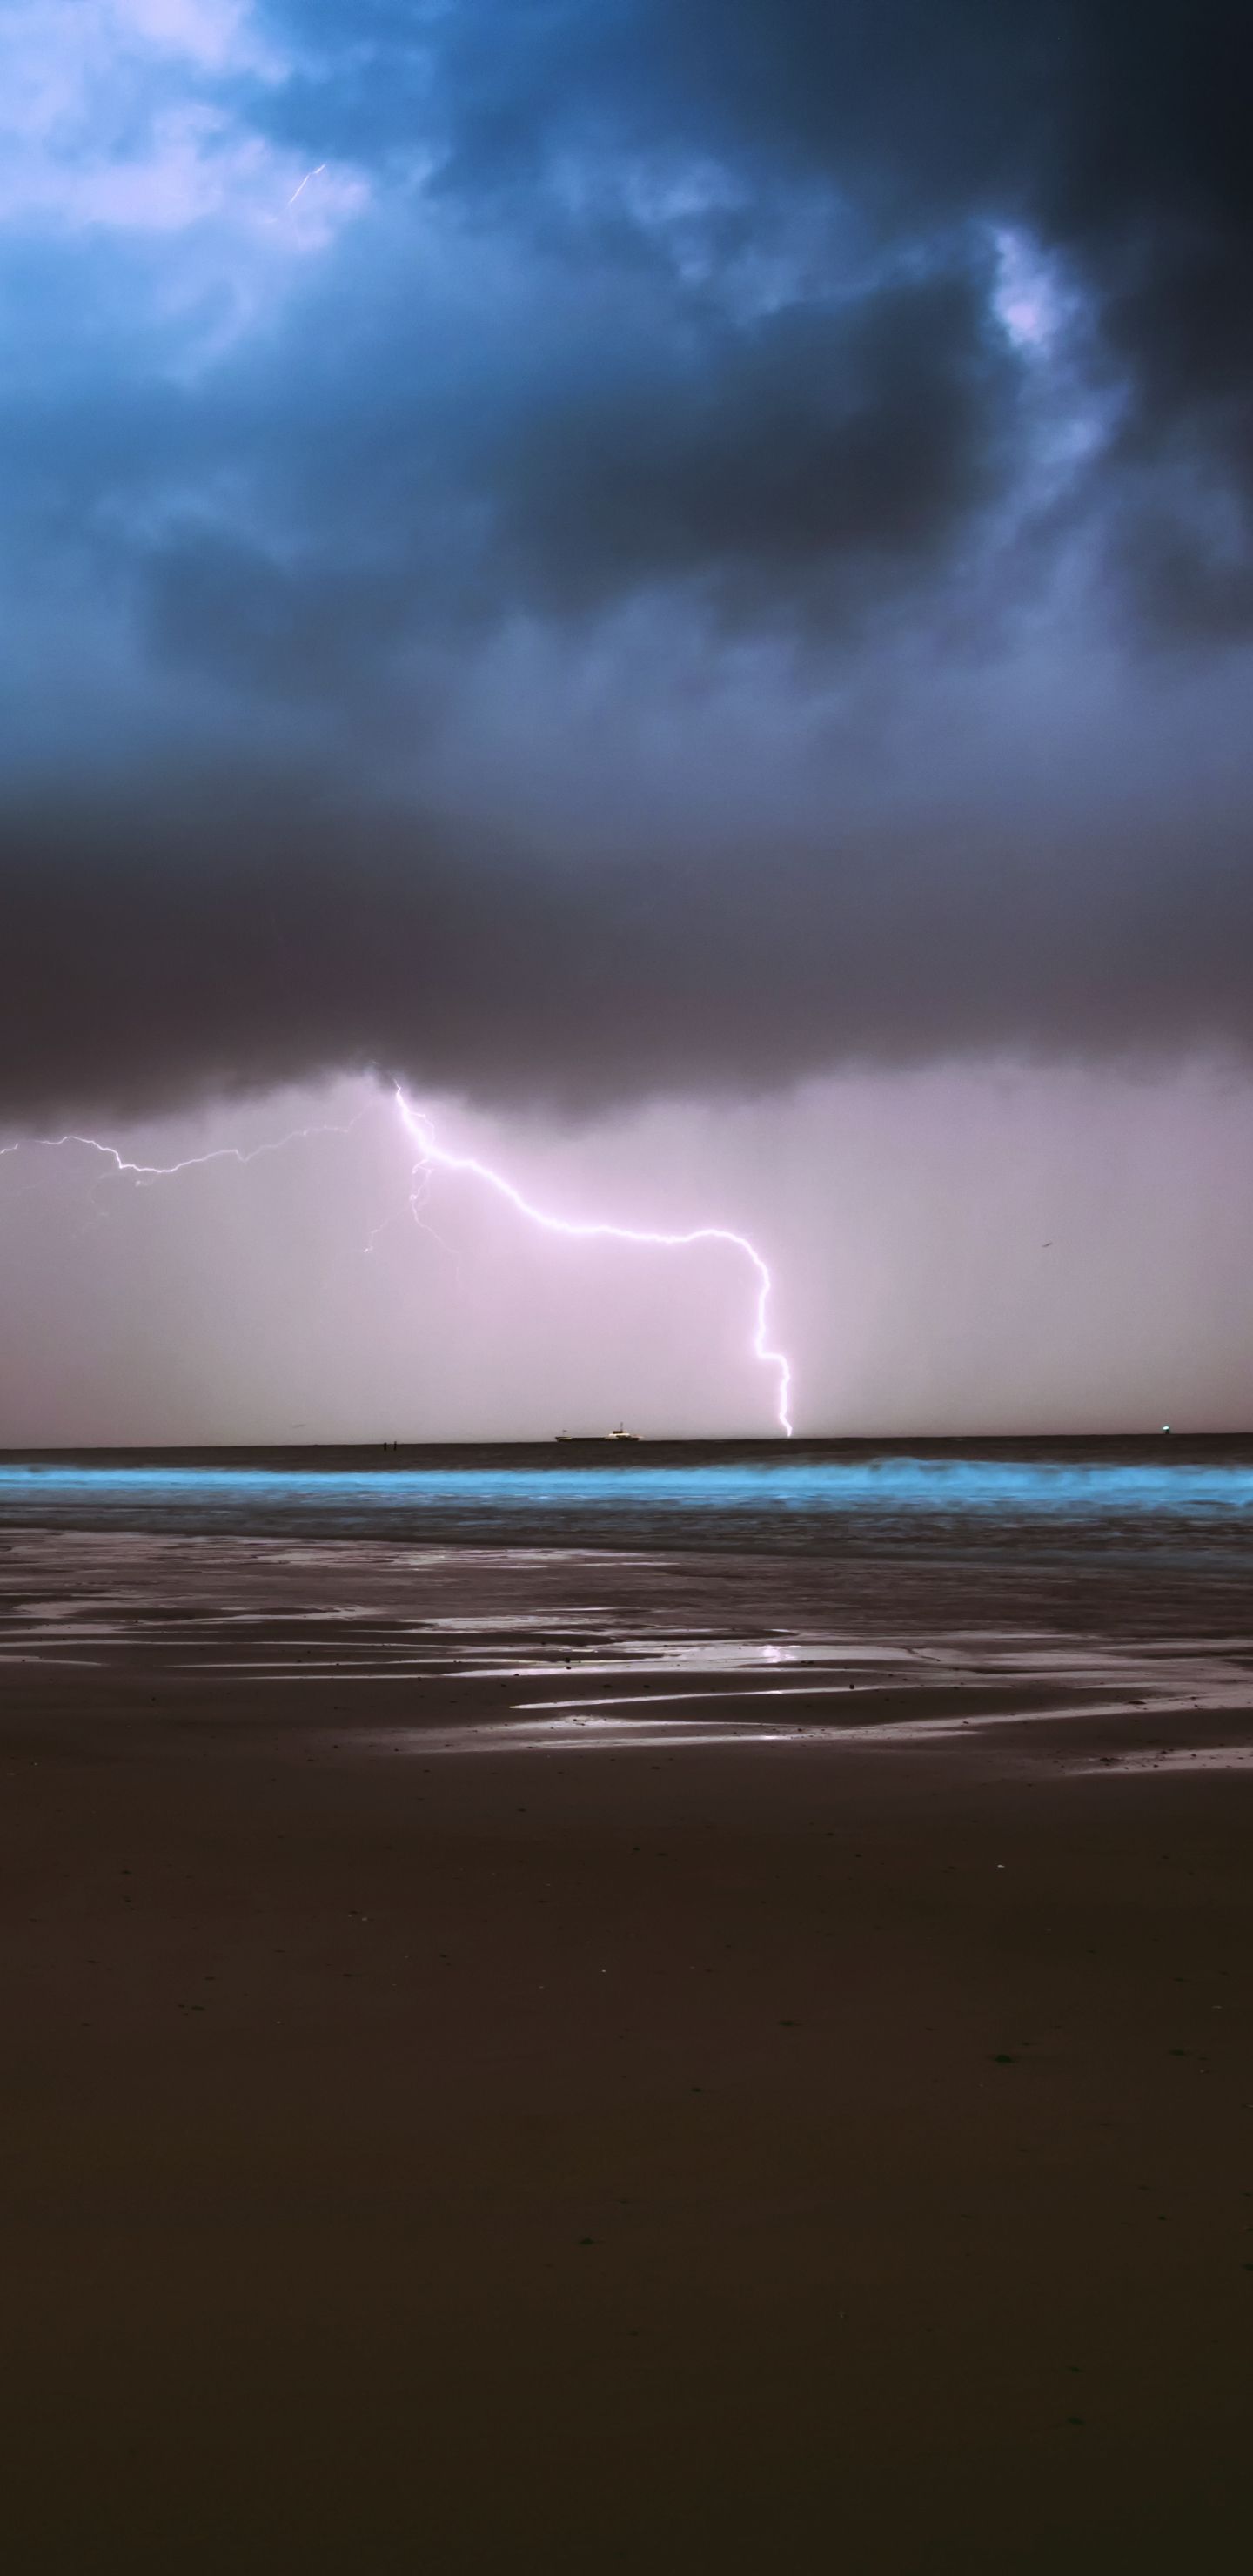 A bolt of lightning strikes the ocean during a storm. - Storm